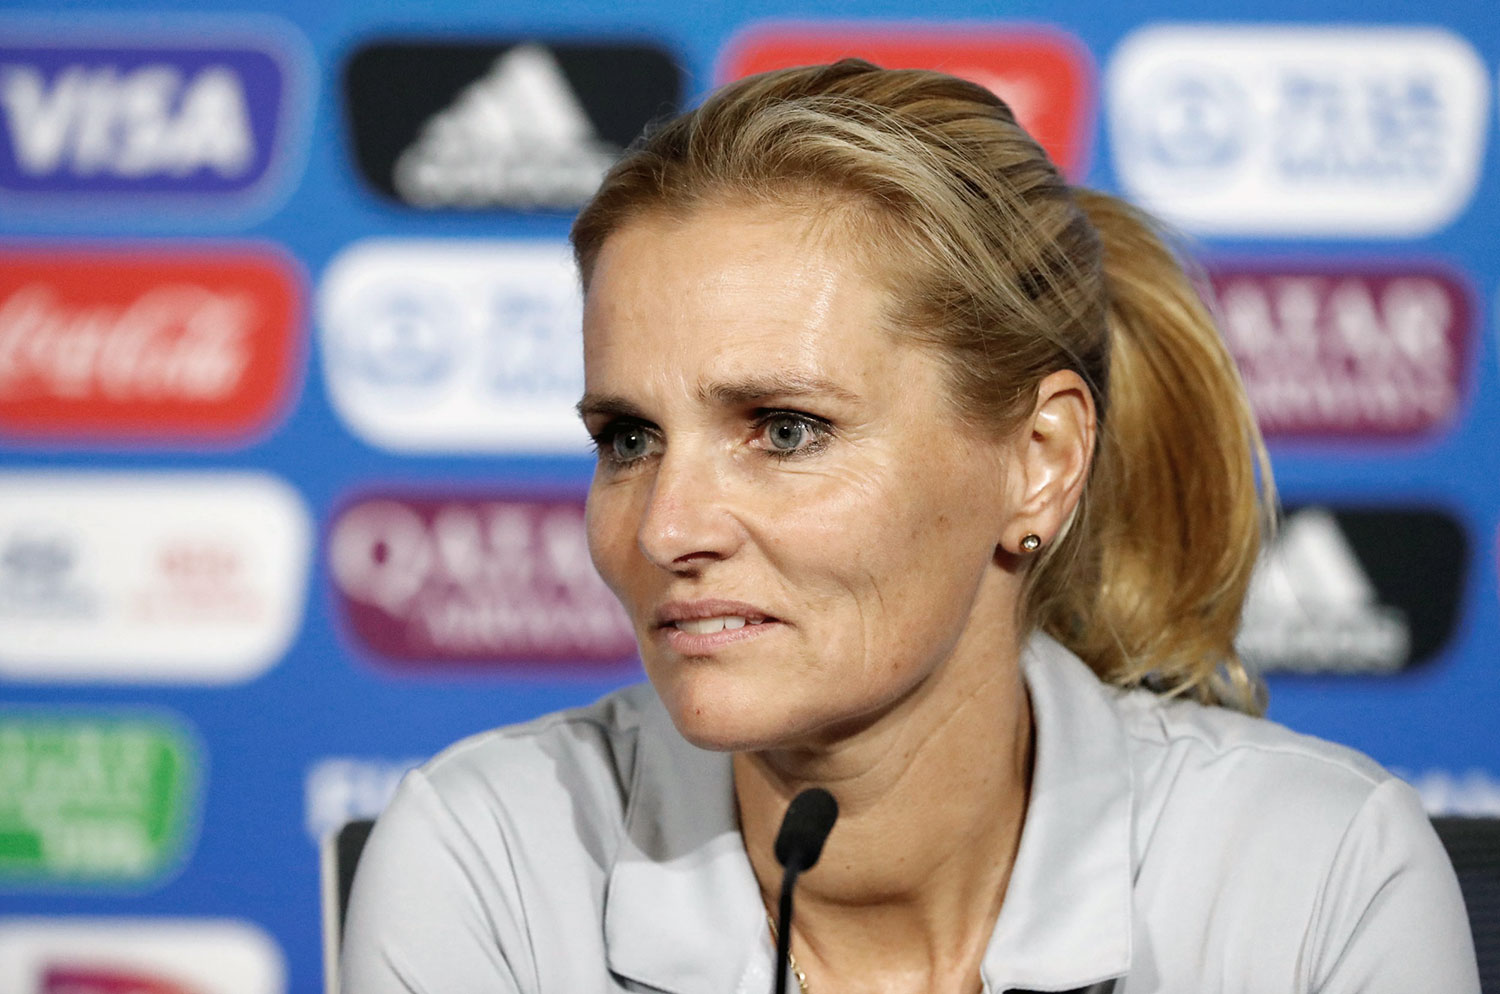 Sarina Wiegman address the press during a World Cup press conference. (Getty Images)